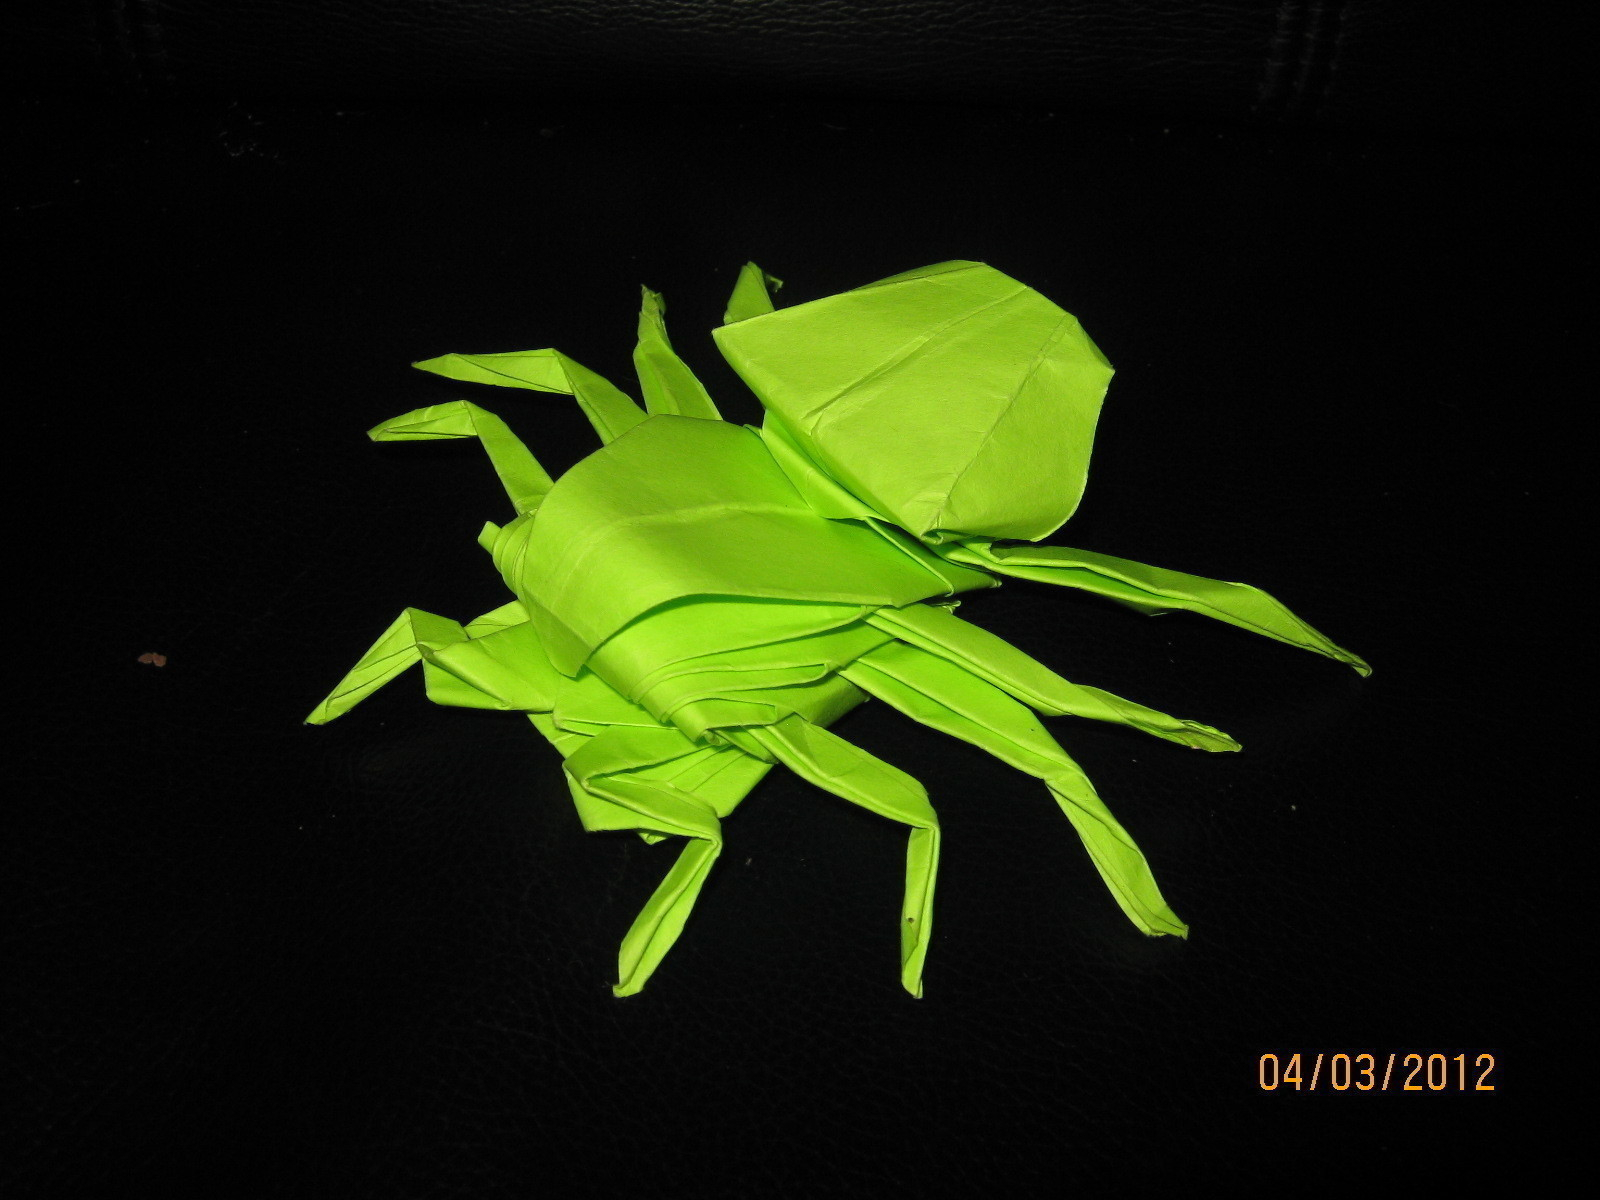 How To Make An Origami Spider Origami Spider An Origami Animal Papercraft Paper Folding And